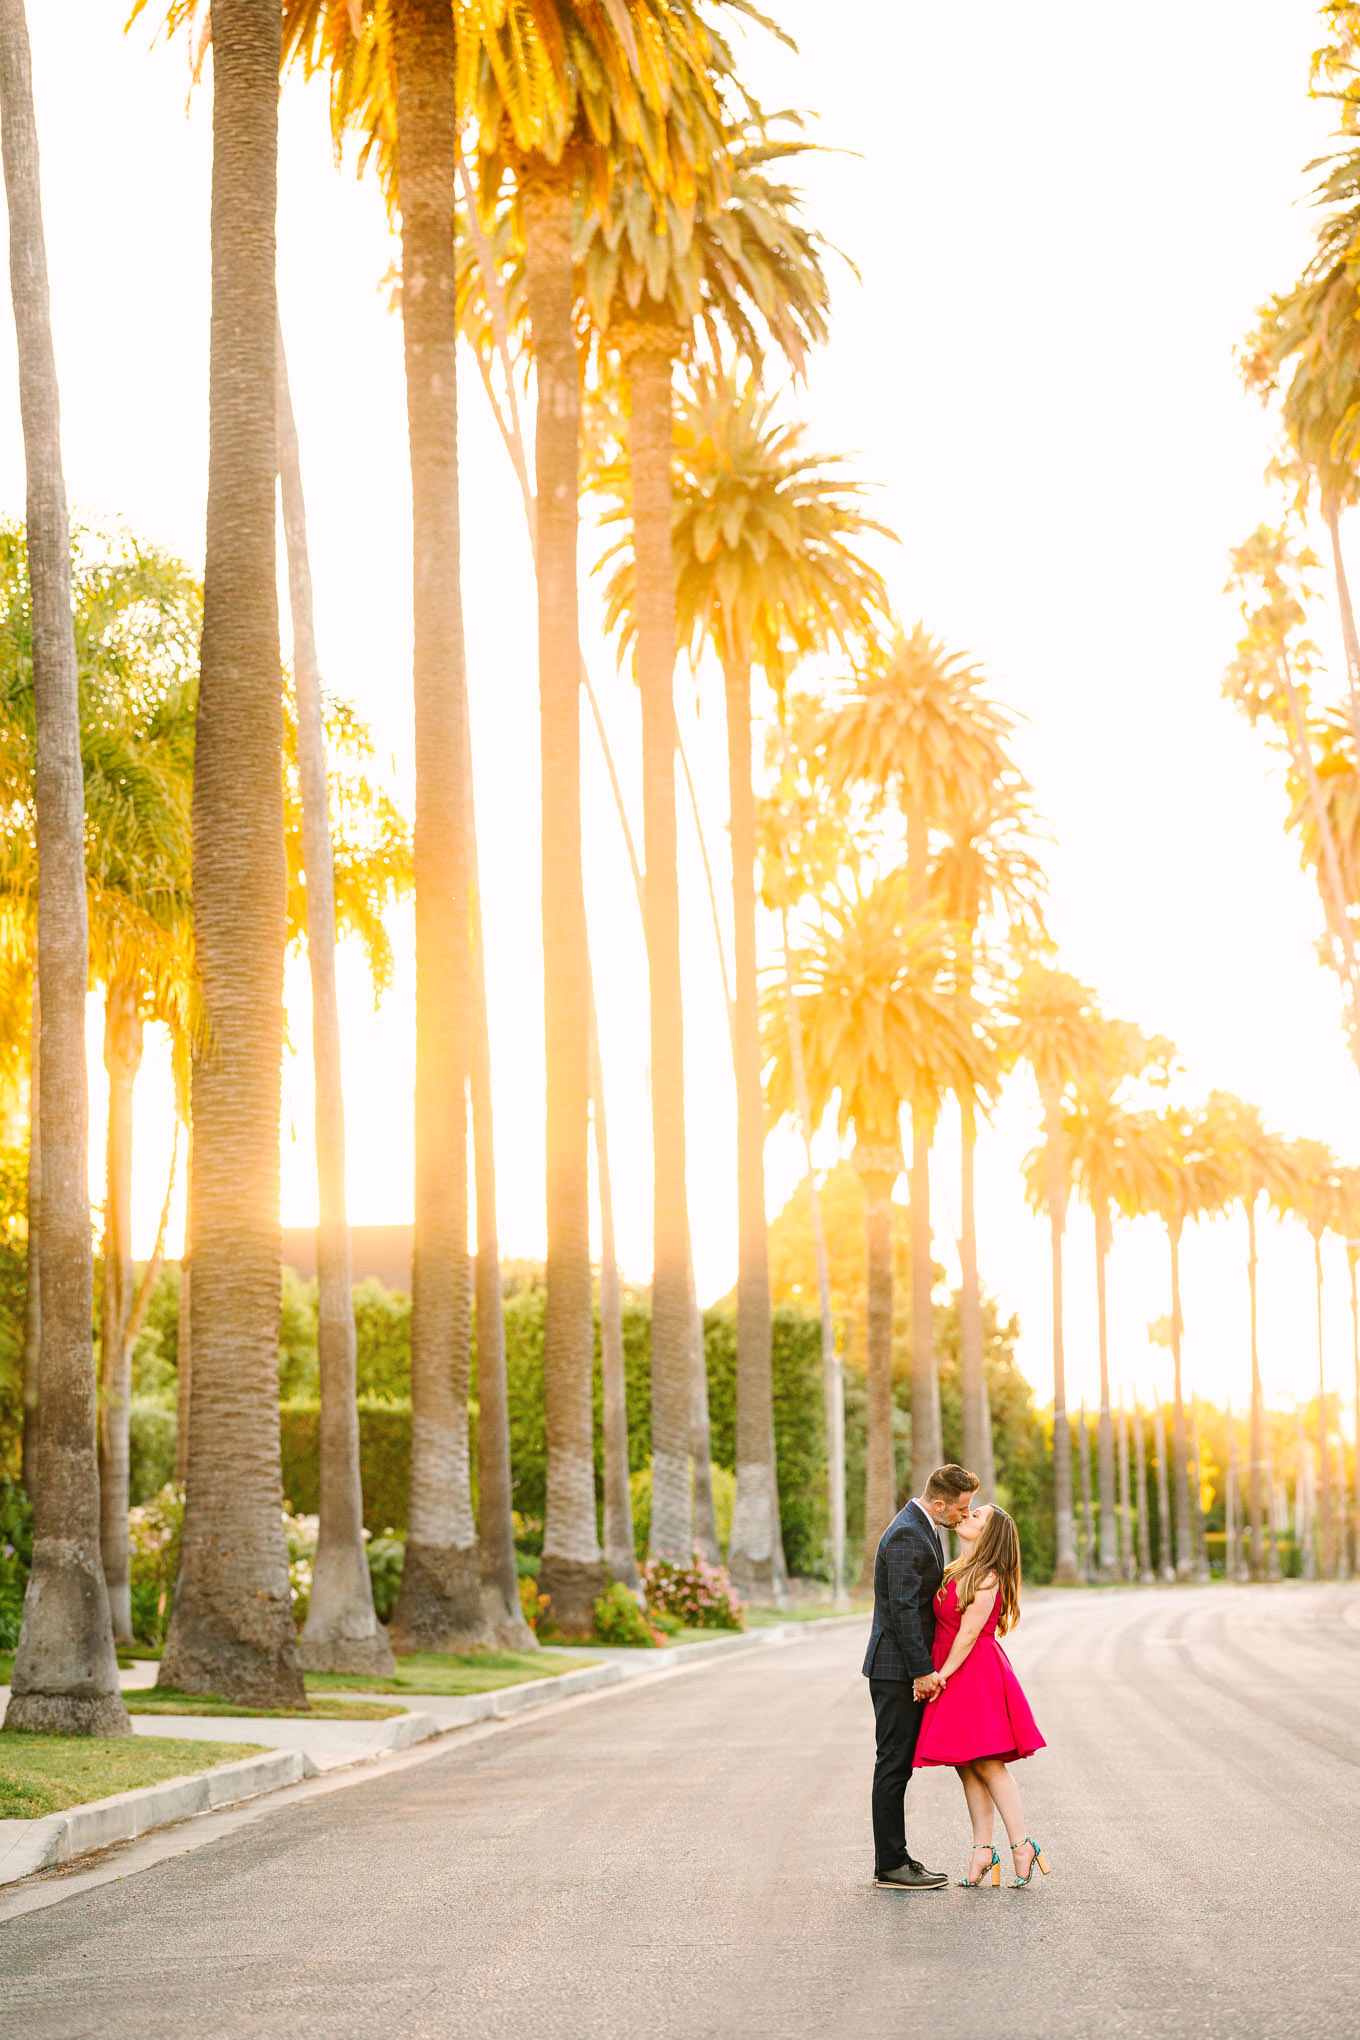 Beverly Hills palm tree engagement session | Wedding and elopement photography roundup | Los Angeles and Palm Springs  photographer | #losangeleswedding #palmspringswedding #elopementphotographer

Source: Mary Costa Photography | Los Angeles